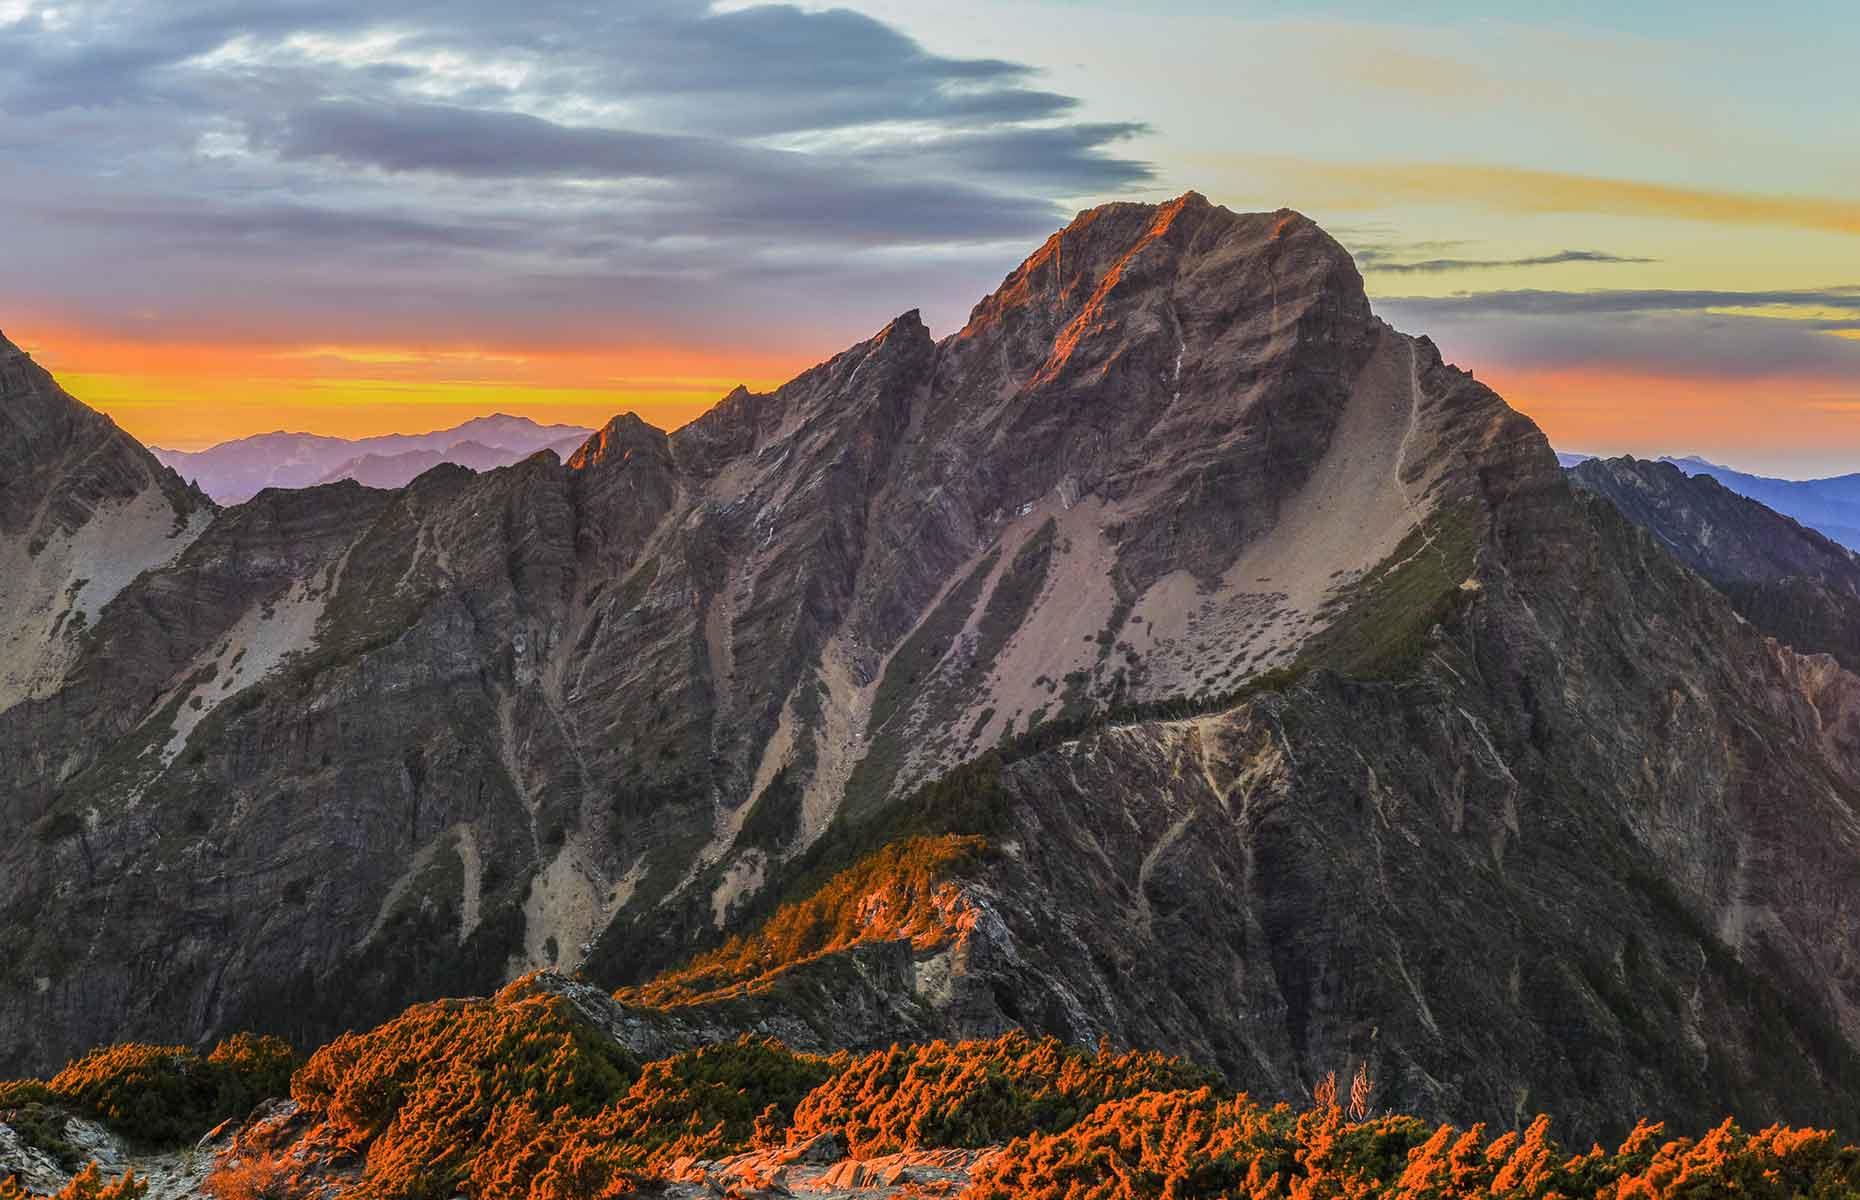 <p>Walk among the clouds at Jade Mountain (or Yushan), Taiwan’s highest peak at 13,000 feet (3,962m) above sea level. Hikers can follow a well-maintained trail that weaves through thickets of bamboo and cedar trees. The hike can be covered in two days with an overnight stay at Paiyun Lodge and it’s certainly worth the early start on the second morning to watch a captivating sunrise like no other. There’s all the more reason to celebrate when you see the marker stone at the top. </p>  <p><a href="https://www.loveexploring.com/gallerylist/95883/secrets-of-the-worlds-most-beautiful-mountains"><strong>Discover the secrets of the world’s most beautiful mountains</strong></a></p>